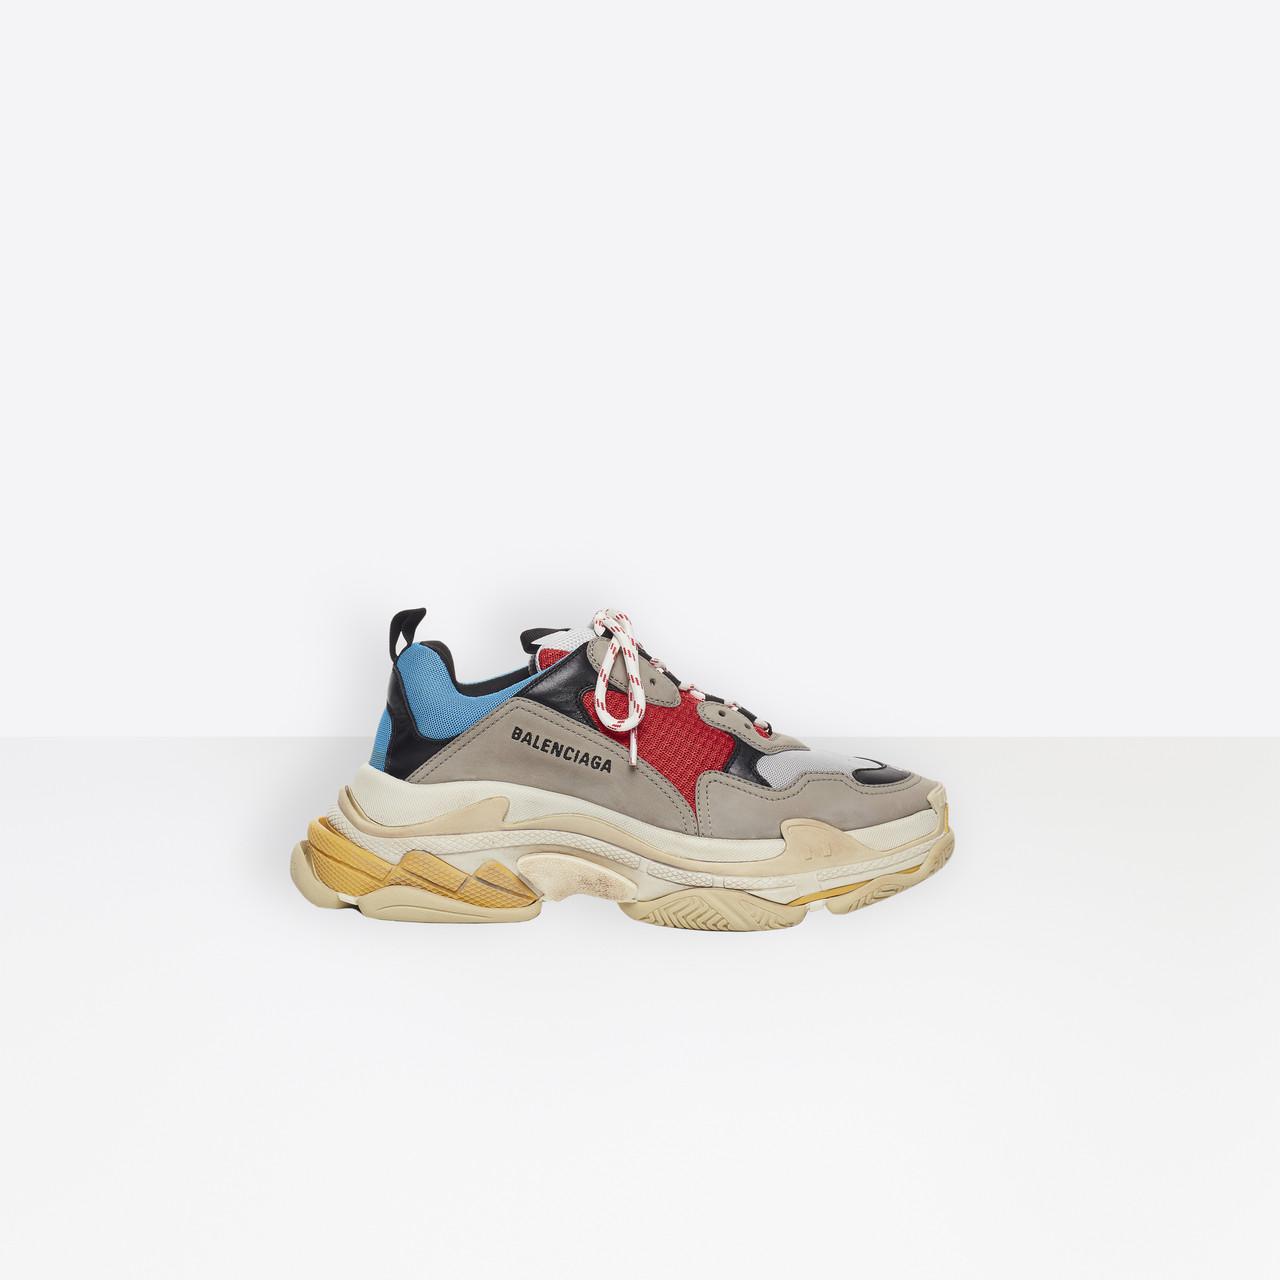 Lyst - Balenciaga Triple S Trainers in Blue for Men